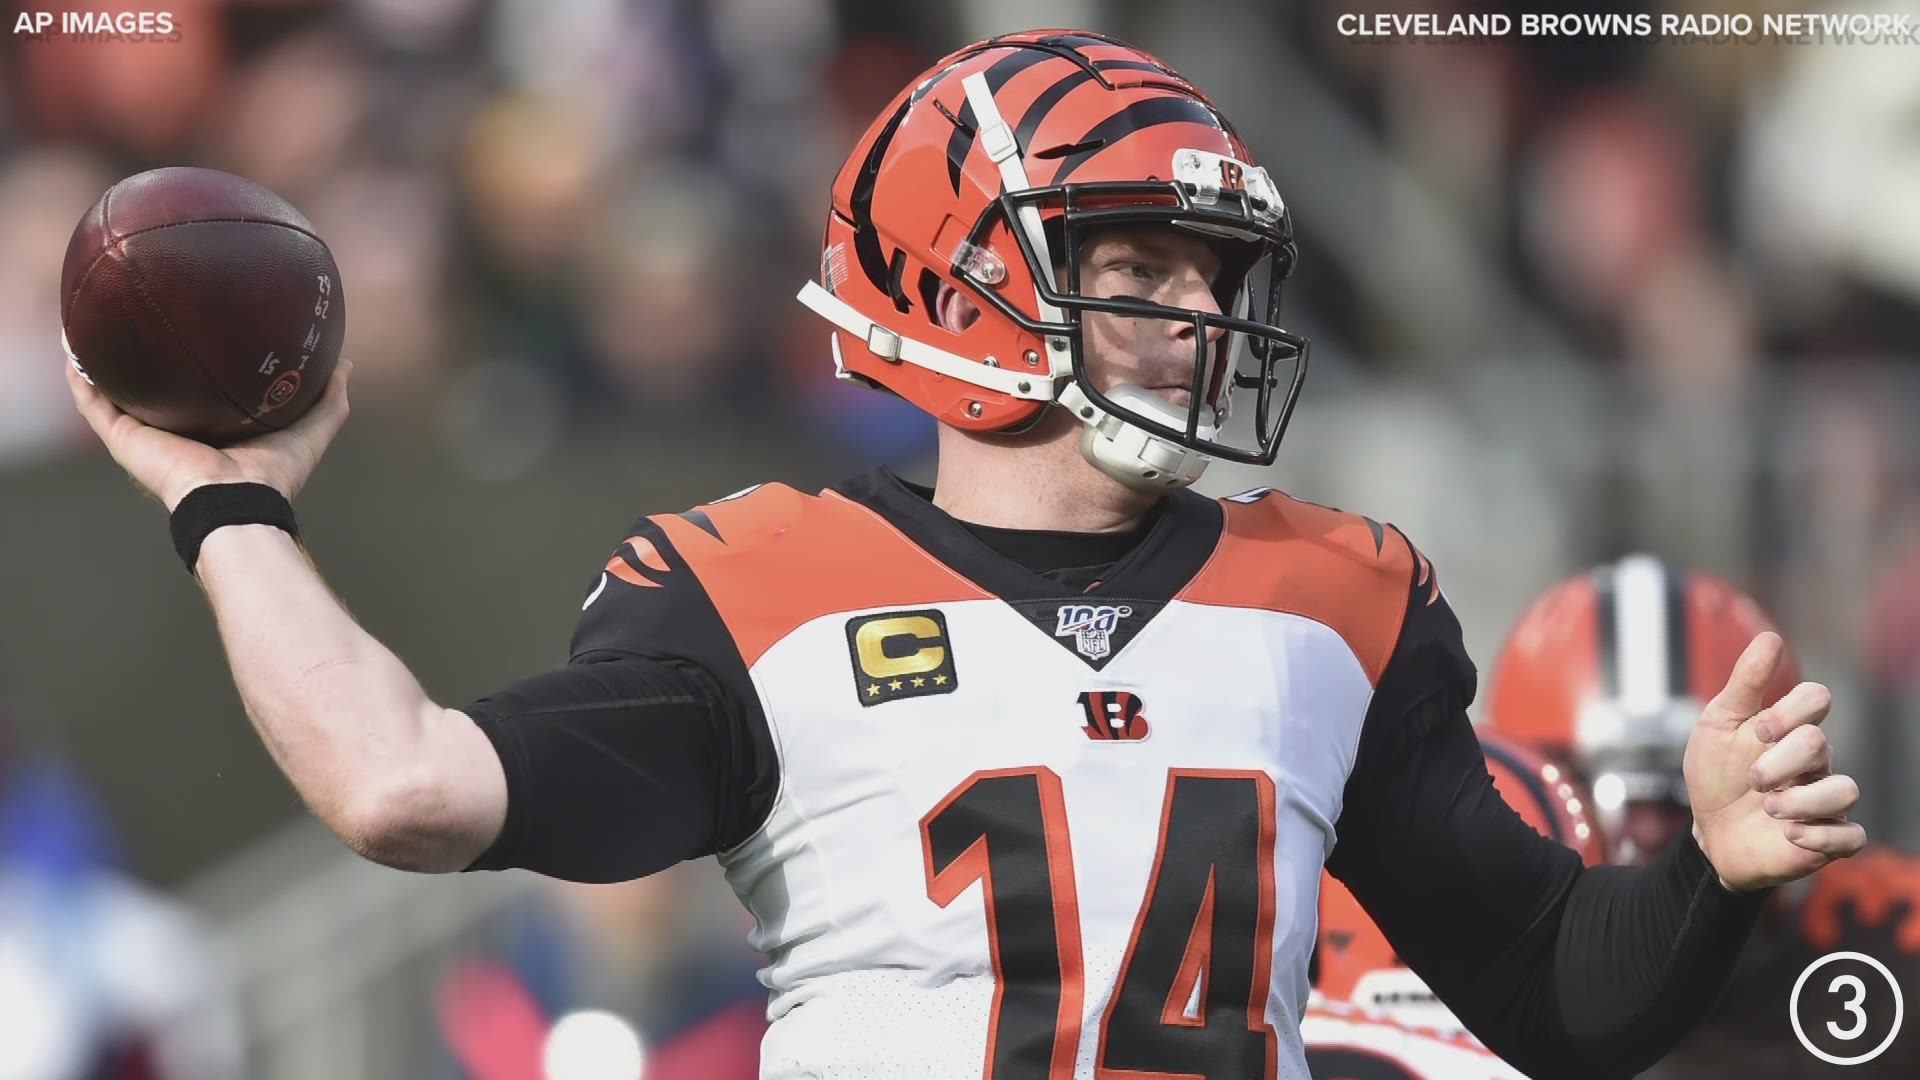 One week after losing to the Pittsburgh Steelers, the Cleveland Browns got a 27-19 victory over the Cincinnati Bengals at FirstEnergy Stadium in Cleveland Sunday.